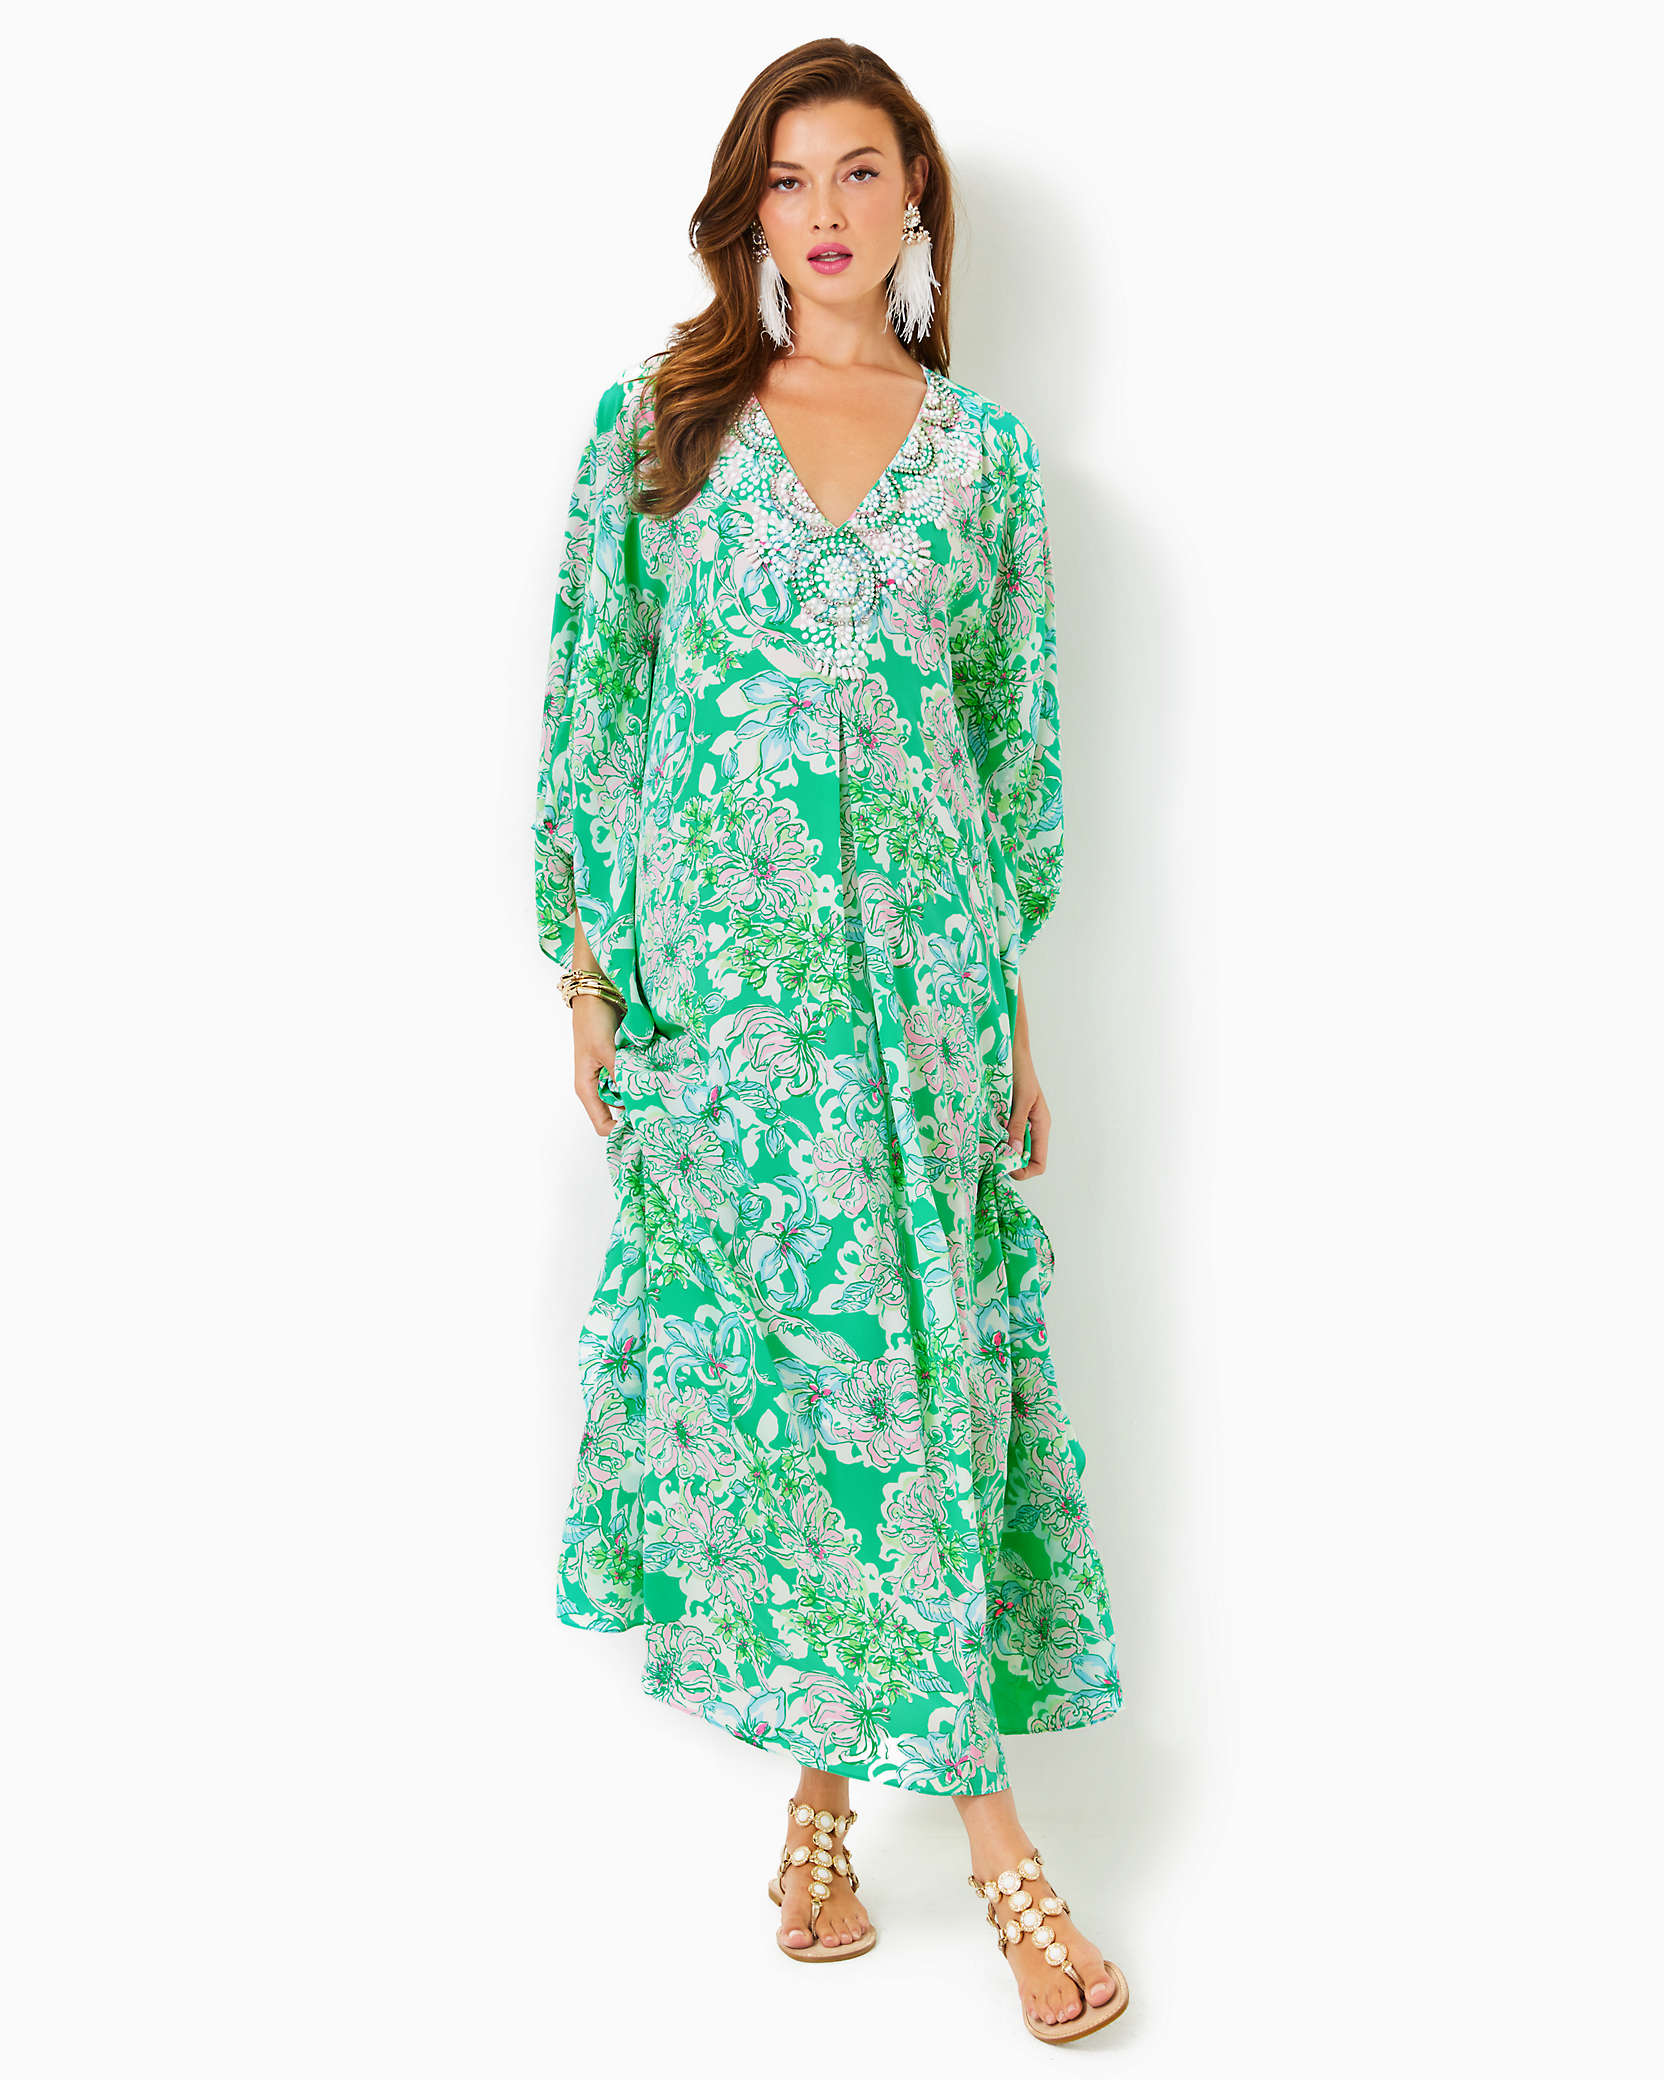 Lilly Pulitzer Mindy Beaded Silk Maxi Caftan In Spearmint Blossom Views